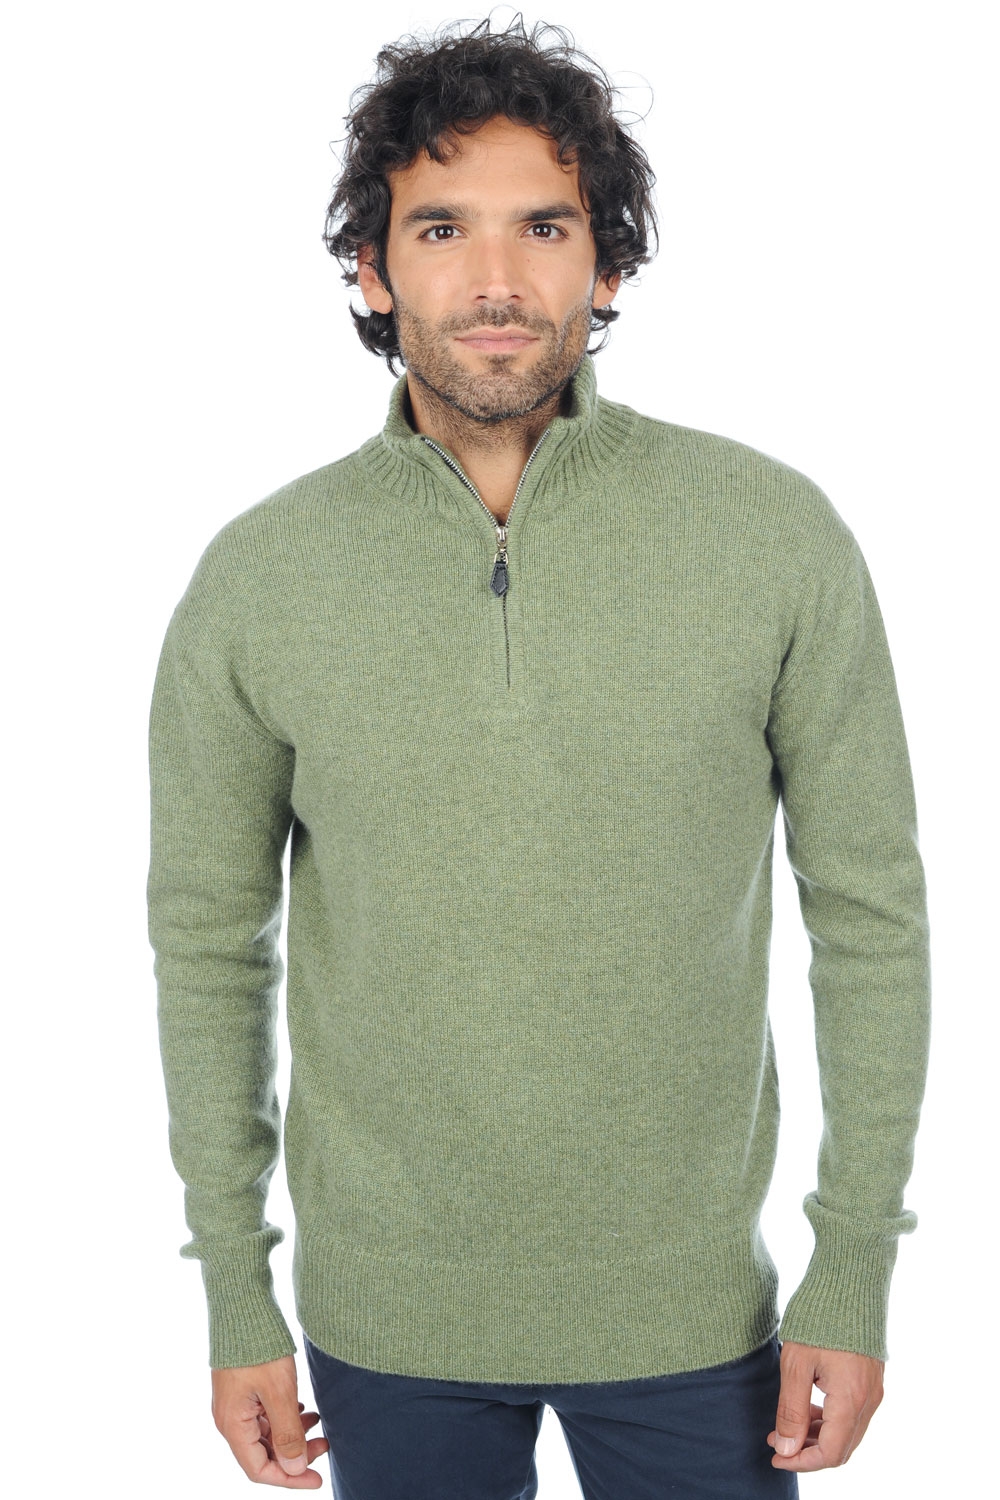 Cashmere men chunky sweater donovan olive chine 2xl